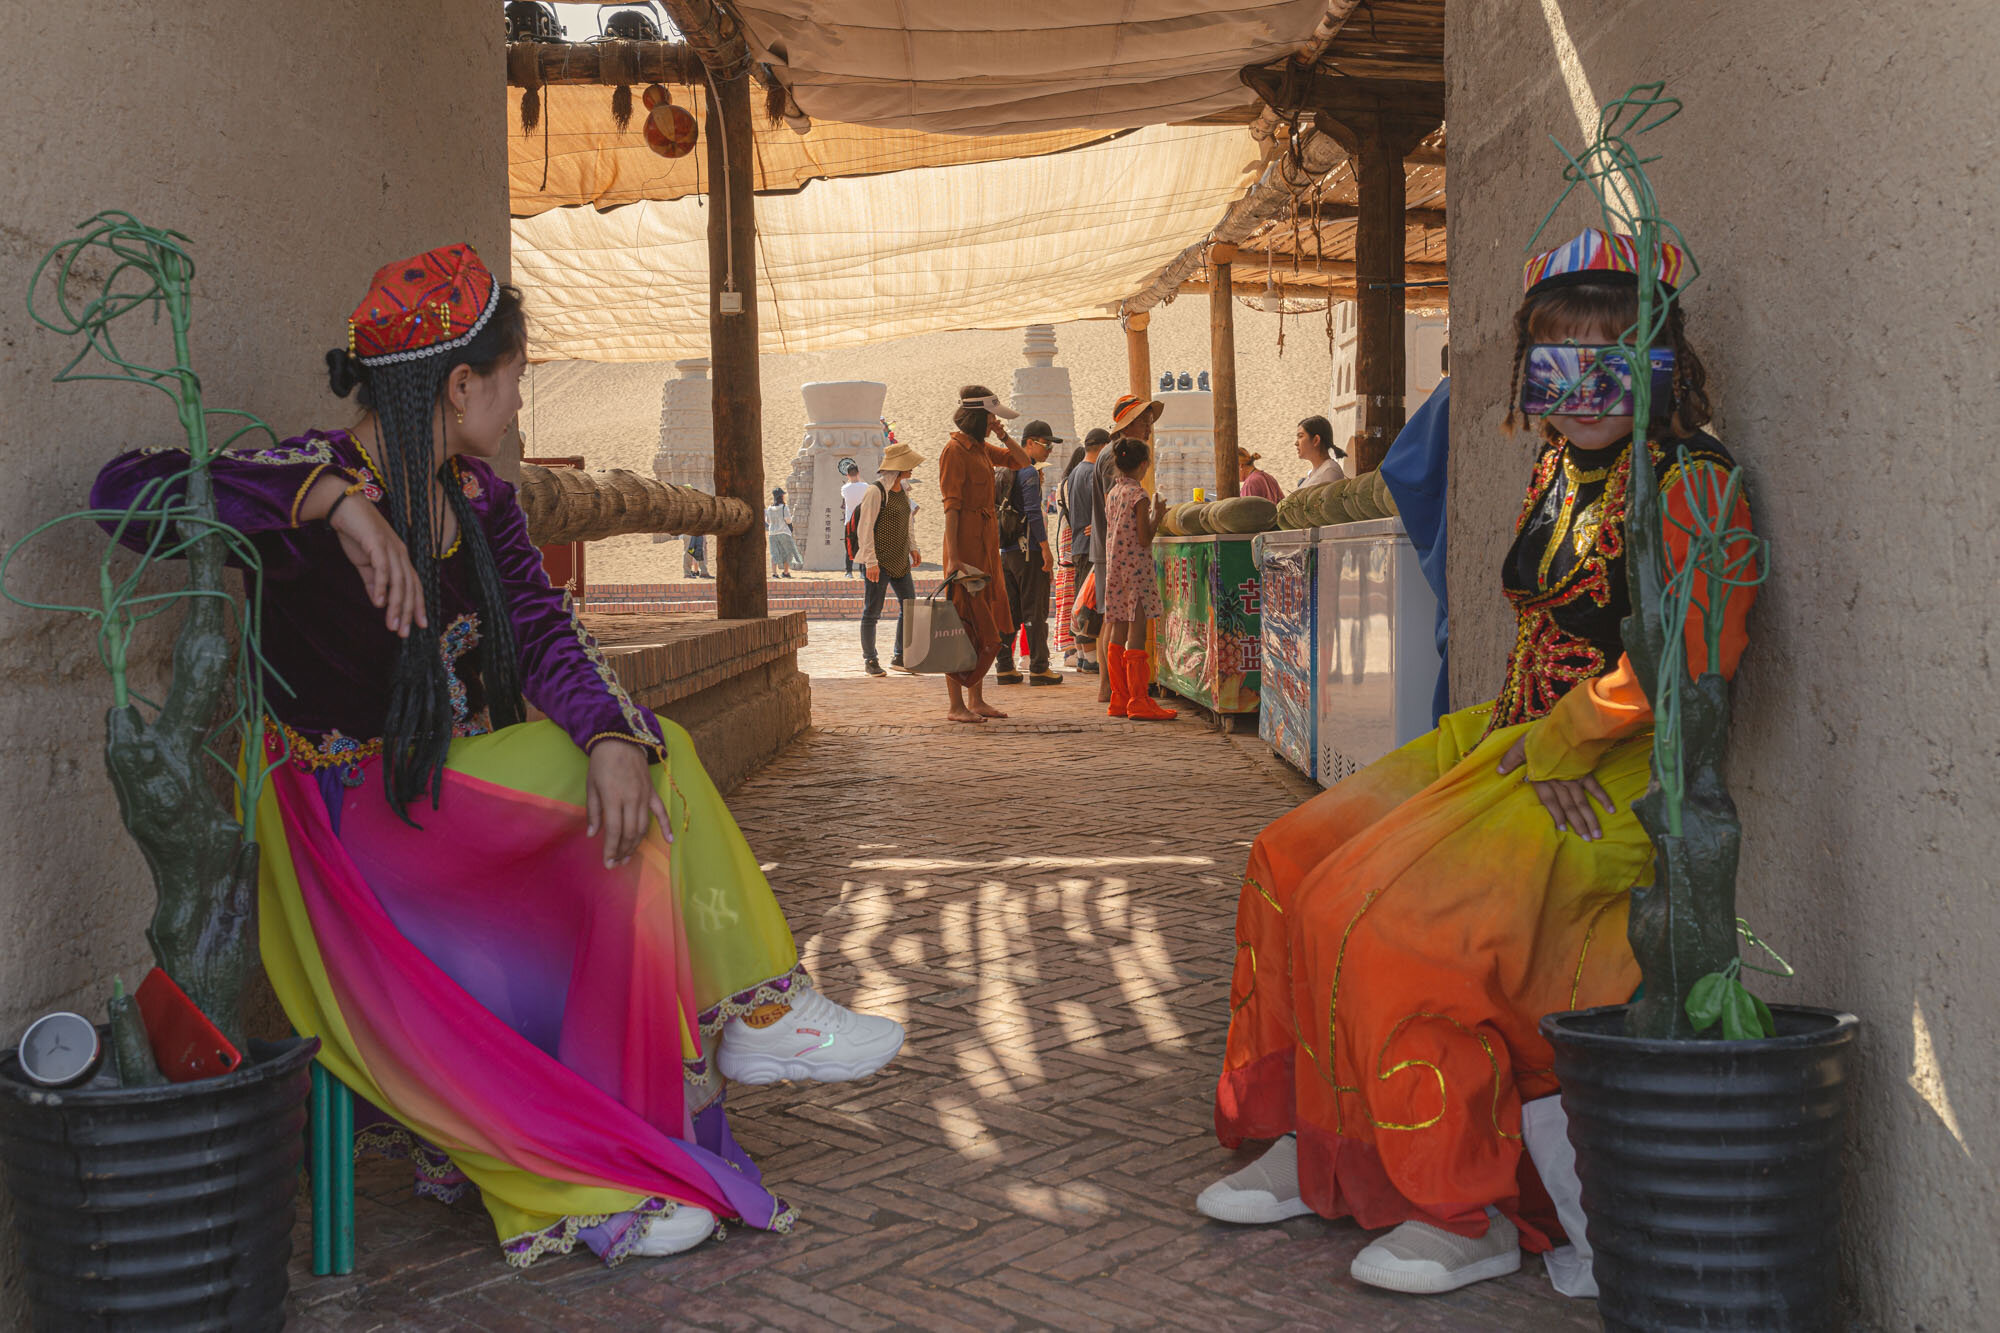  September 28th 2019. Shanshan County, Xinjiang province, China. On the site of the Kumtag Desert Scenic Area, a desert-tourism park catering mostly to Han-Chinese tourists. Young Uighur women dressed up in folklore flashy dresses offer to pose for m